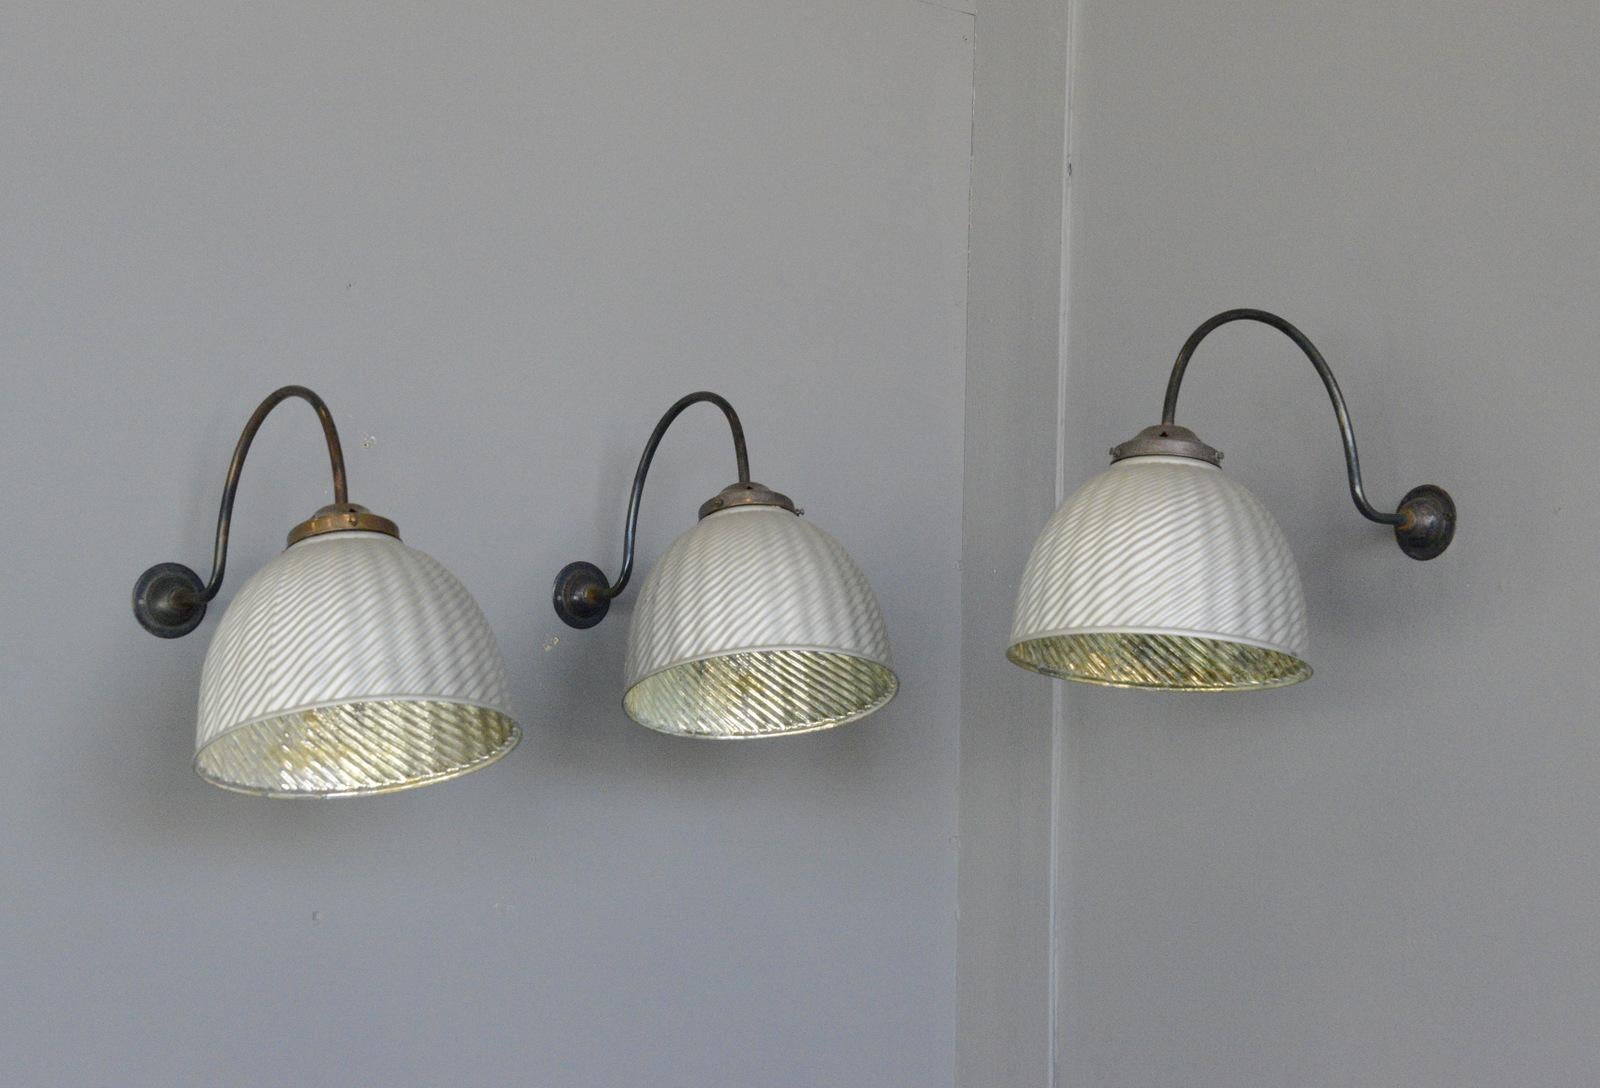 Large wall-mounted mercury lights, circa 1920s

- Price is per light (1 available)
- Curved copper arms
- Mercury glass mirrored reflectors
- Takes E27 fitting bulbs
- Wires directly into the wall
- Czech ~ 1920s
- Measures: 25cm wide x 50cm tall x